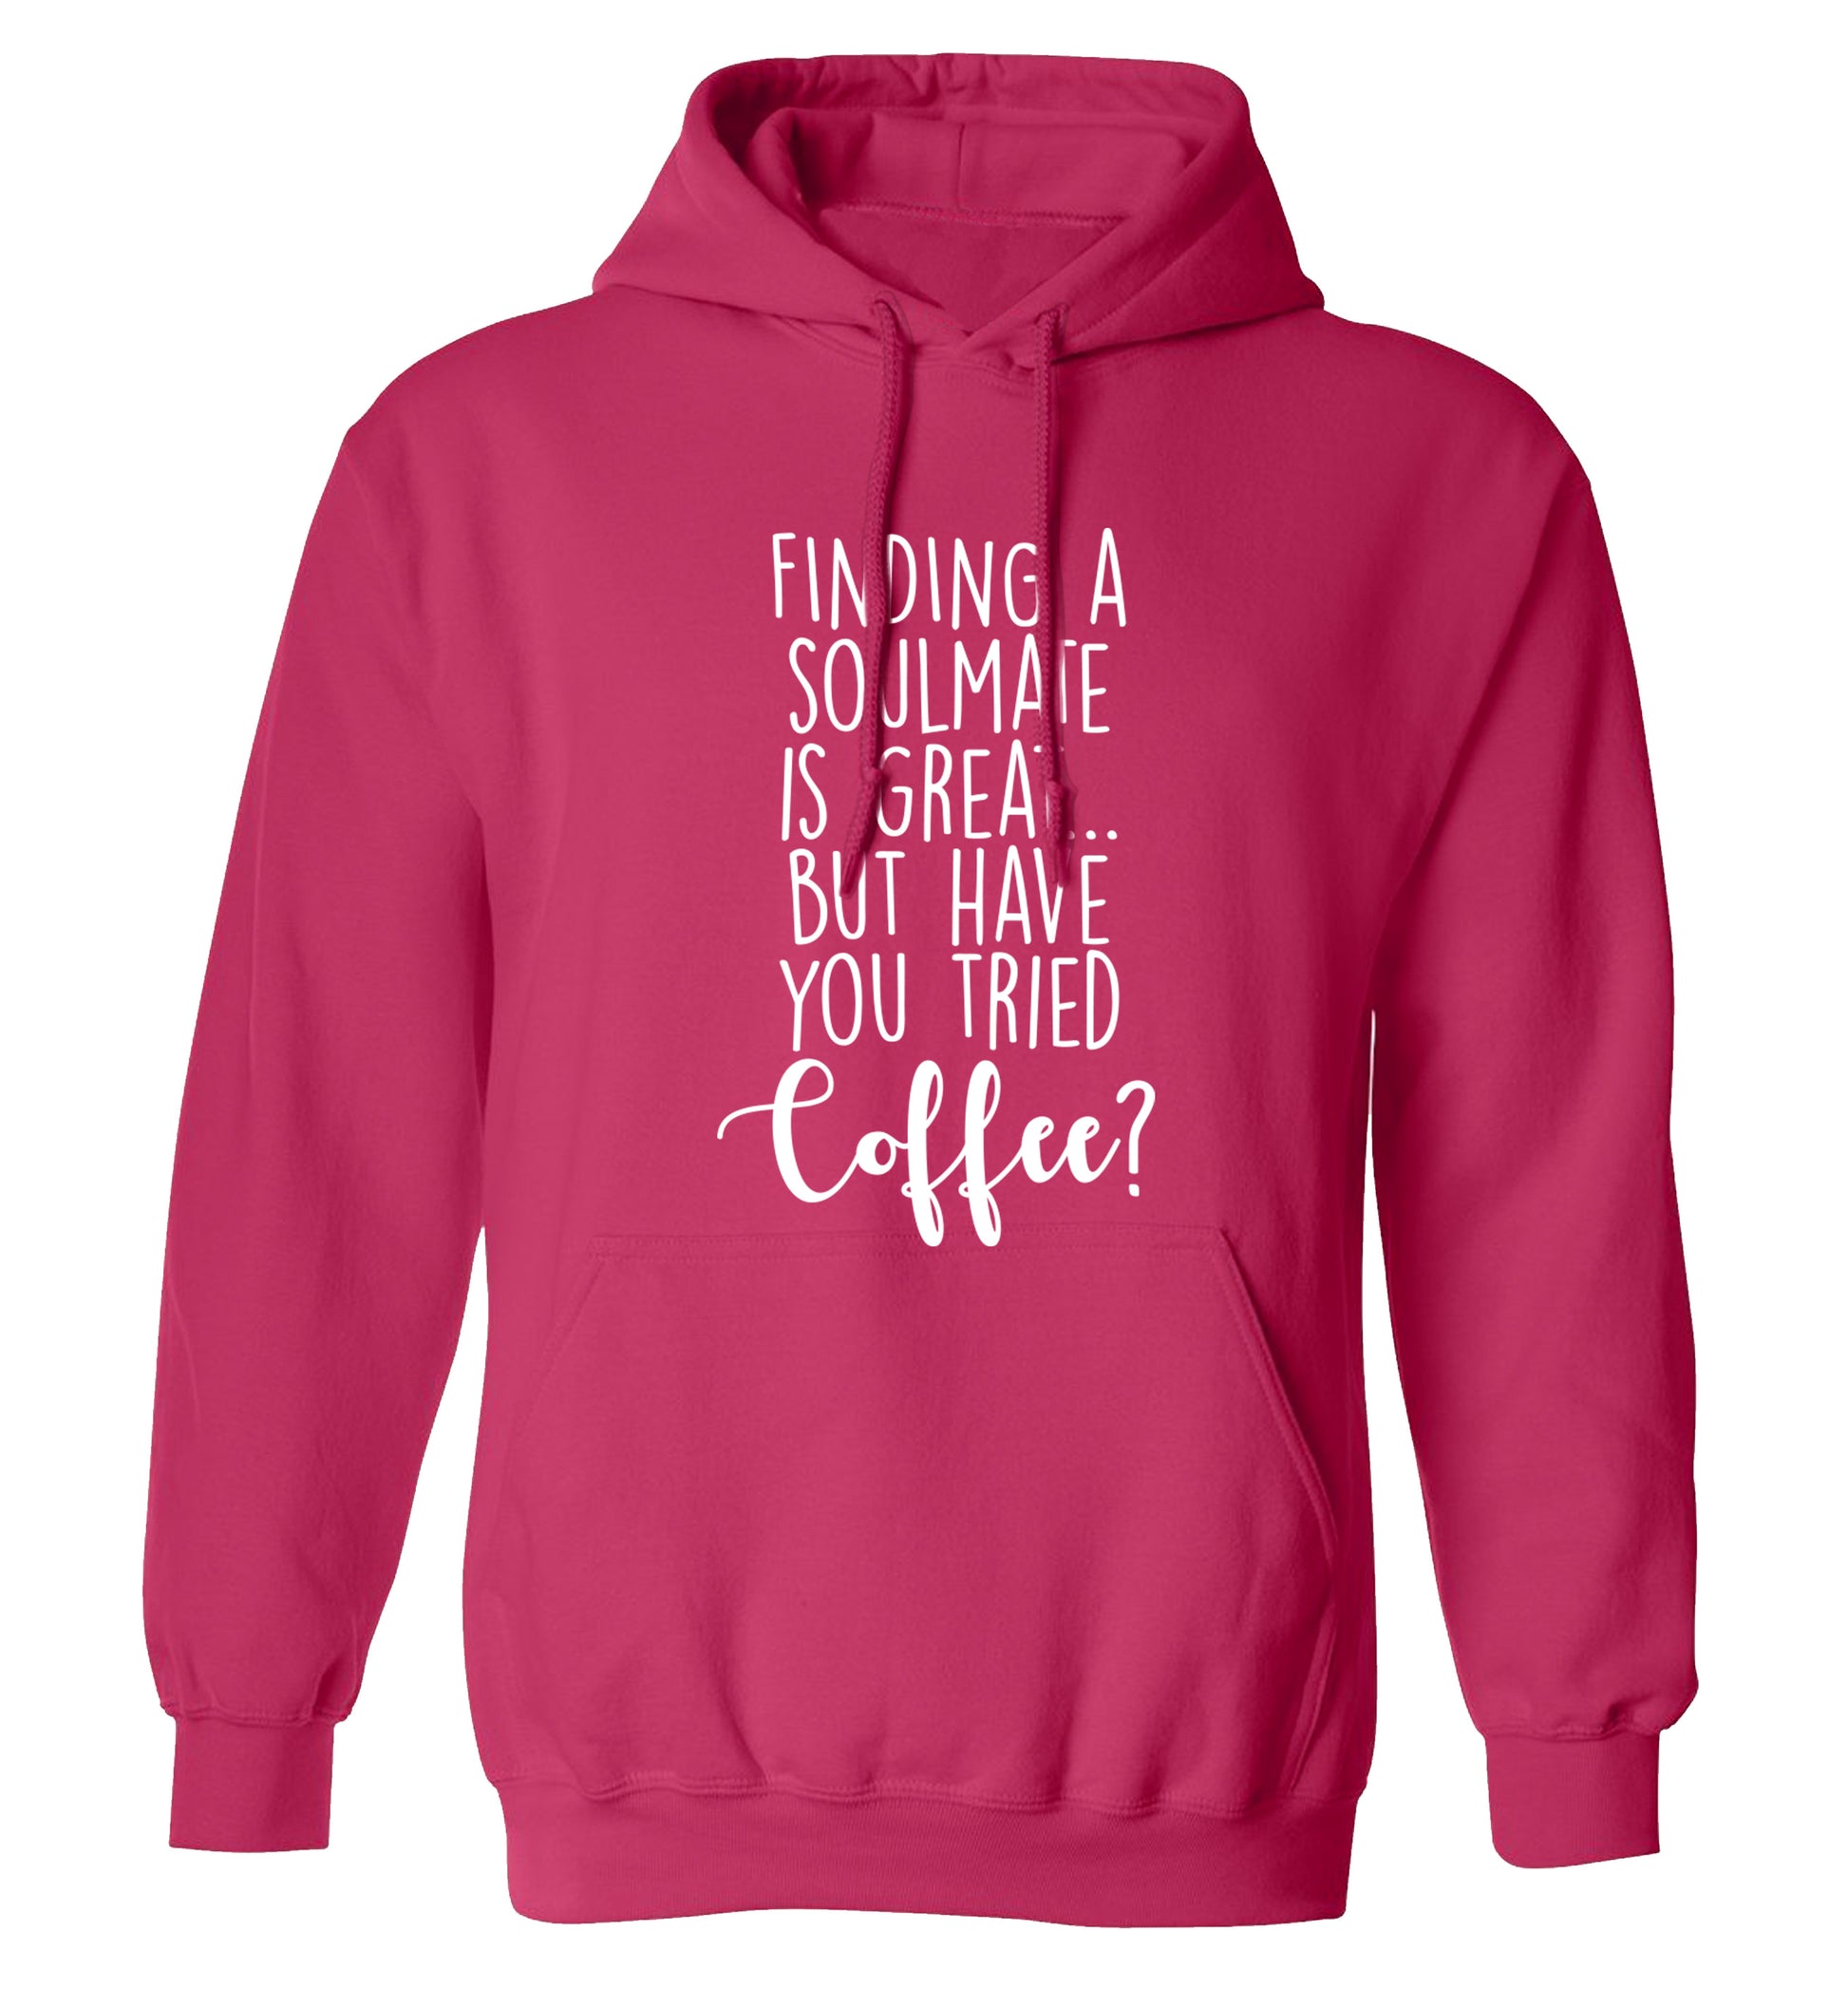 Finding a soulmate is great but have you tried coffee? adults unisex pink hoodie 2XL